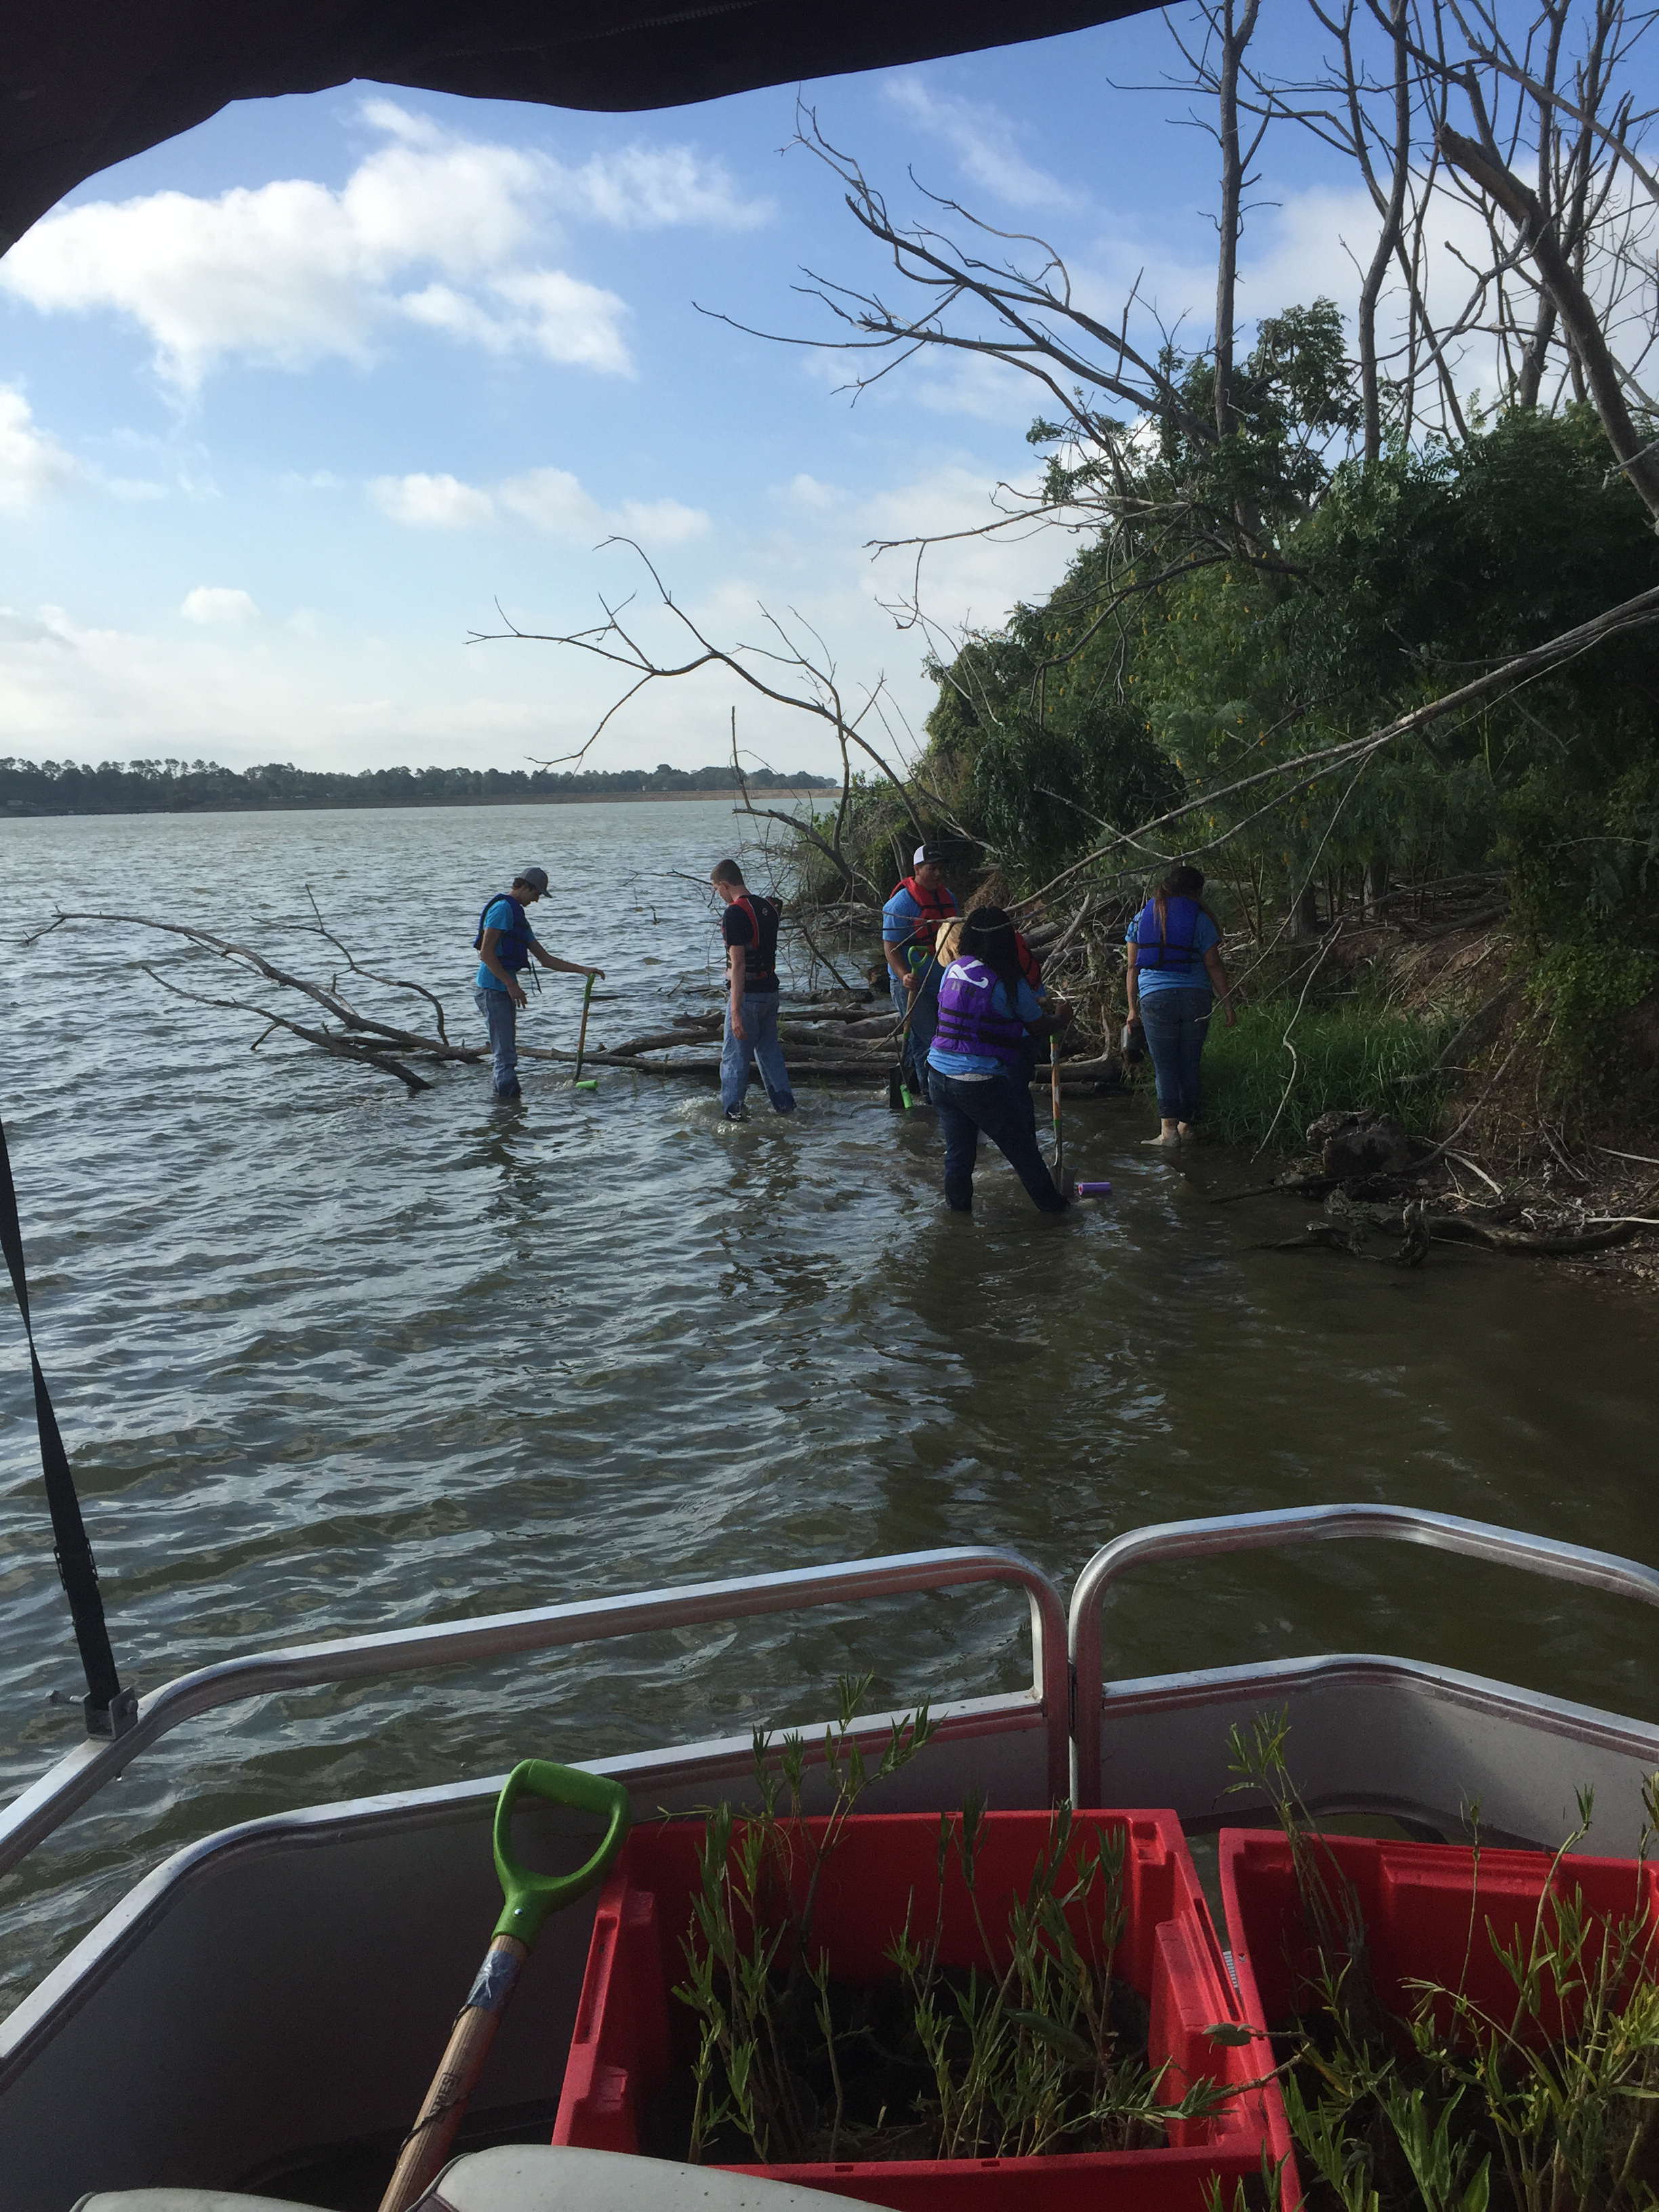 Water willows being planted by students into Lake Livingston